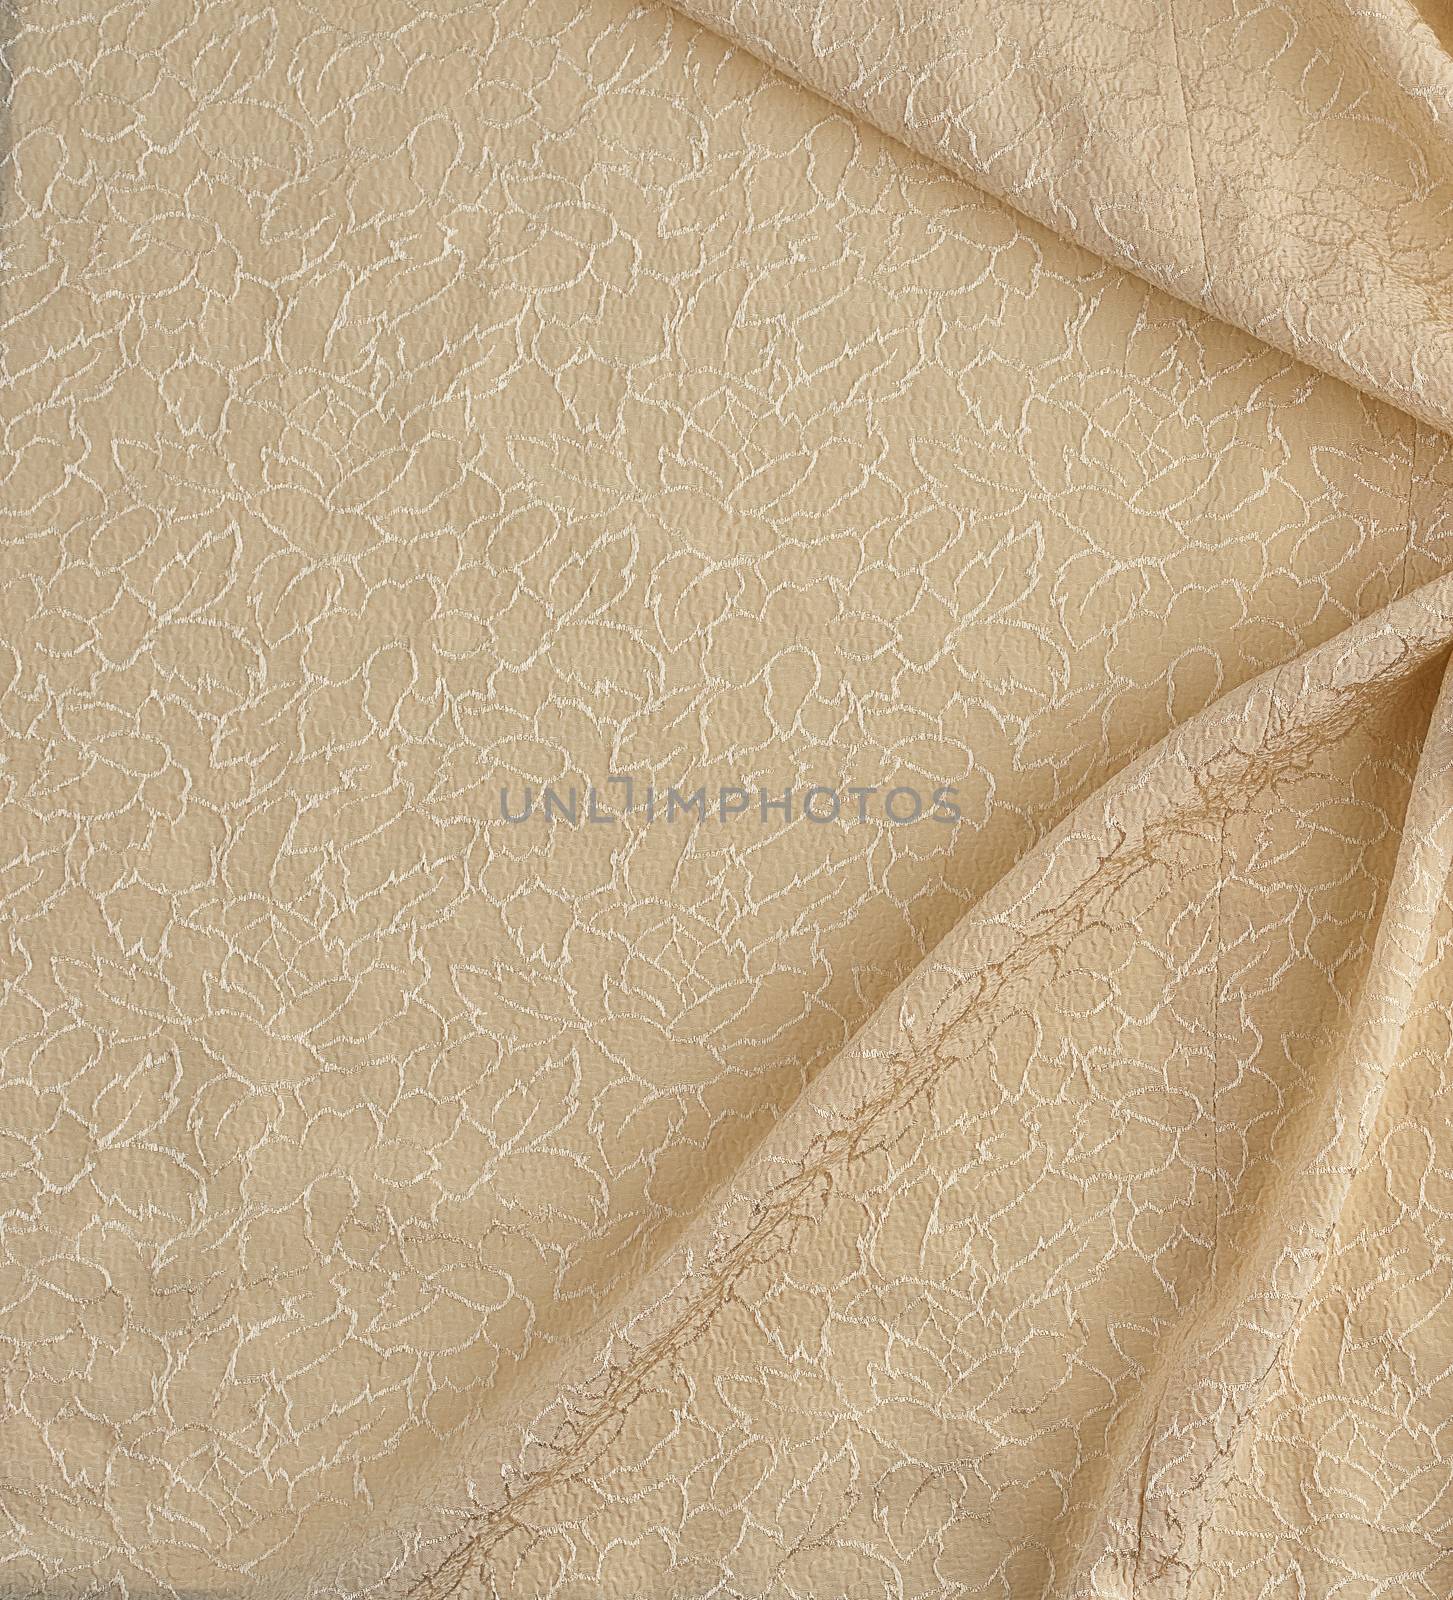 beige satin textile fabric with embroidery elements, piece of canvas for sewing curtains and things, full frame. Crumpled textile satin, great design for any purposes.